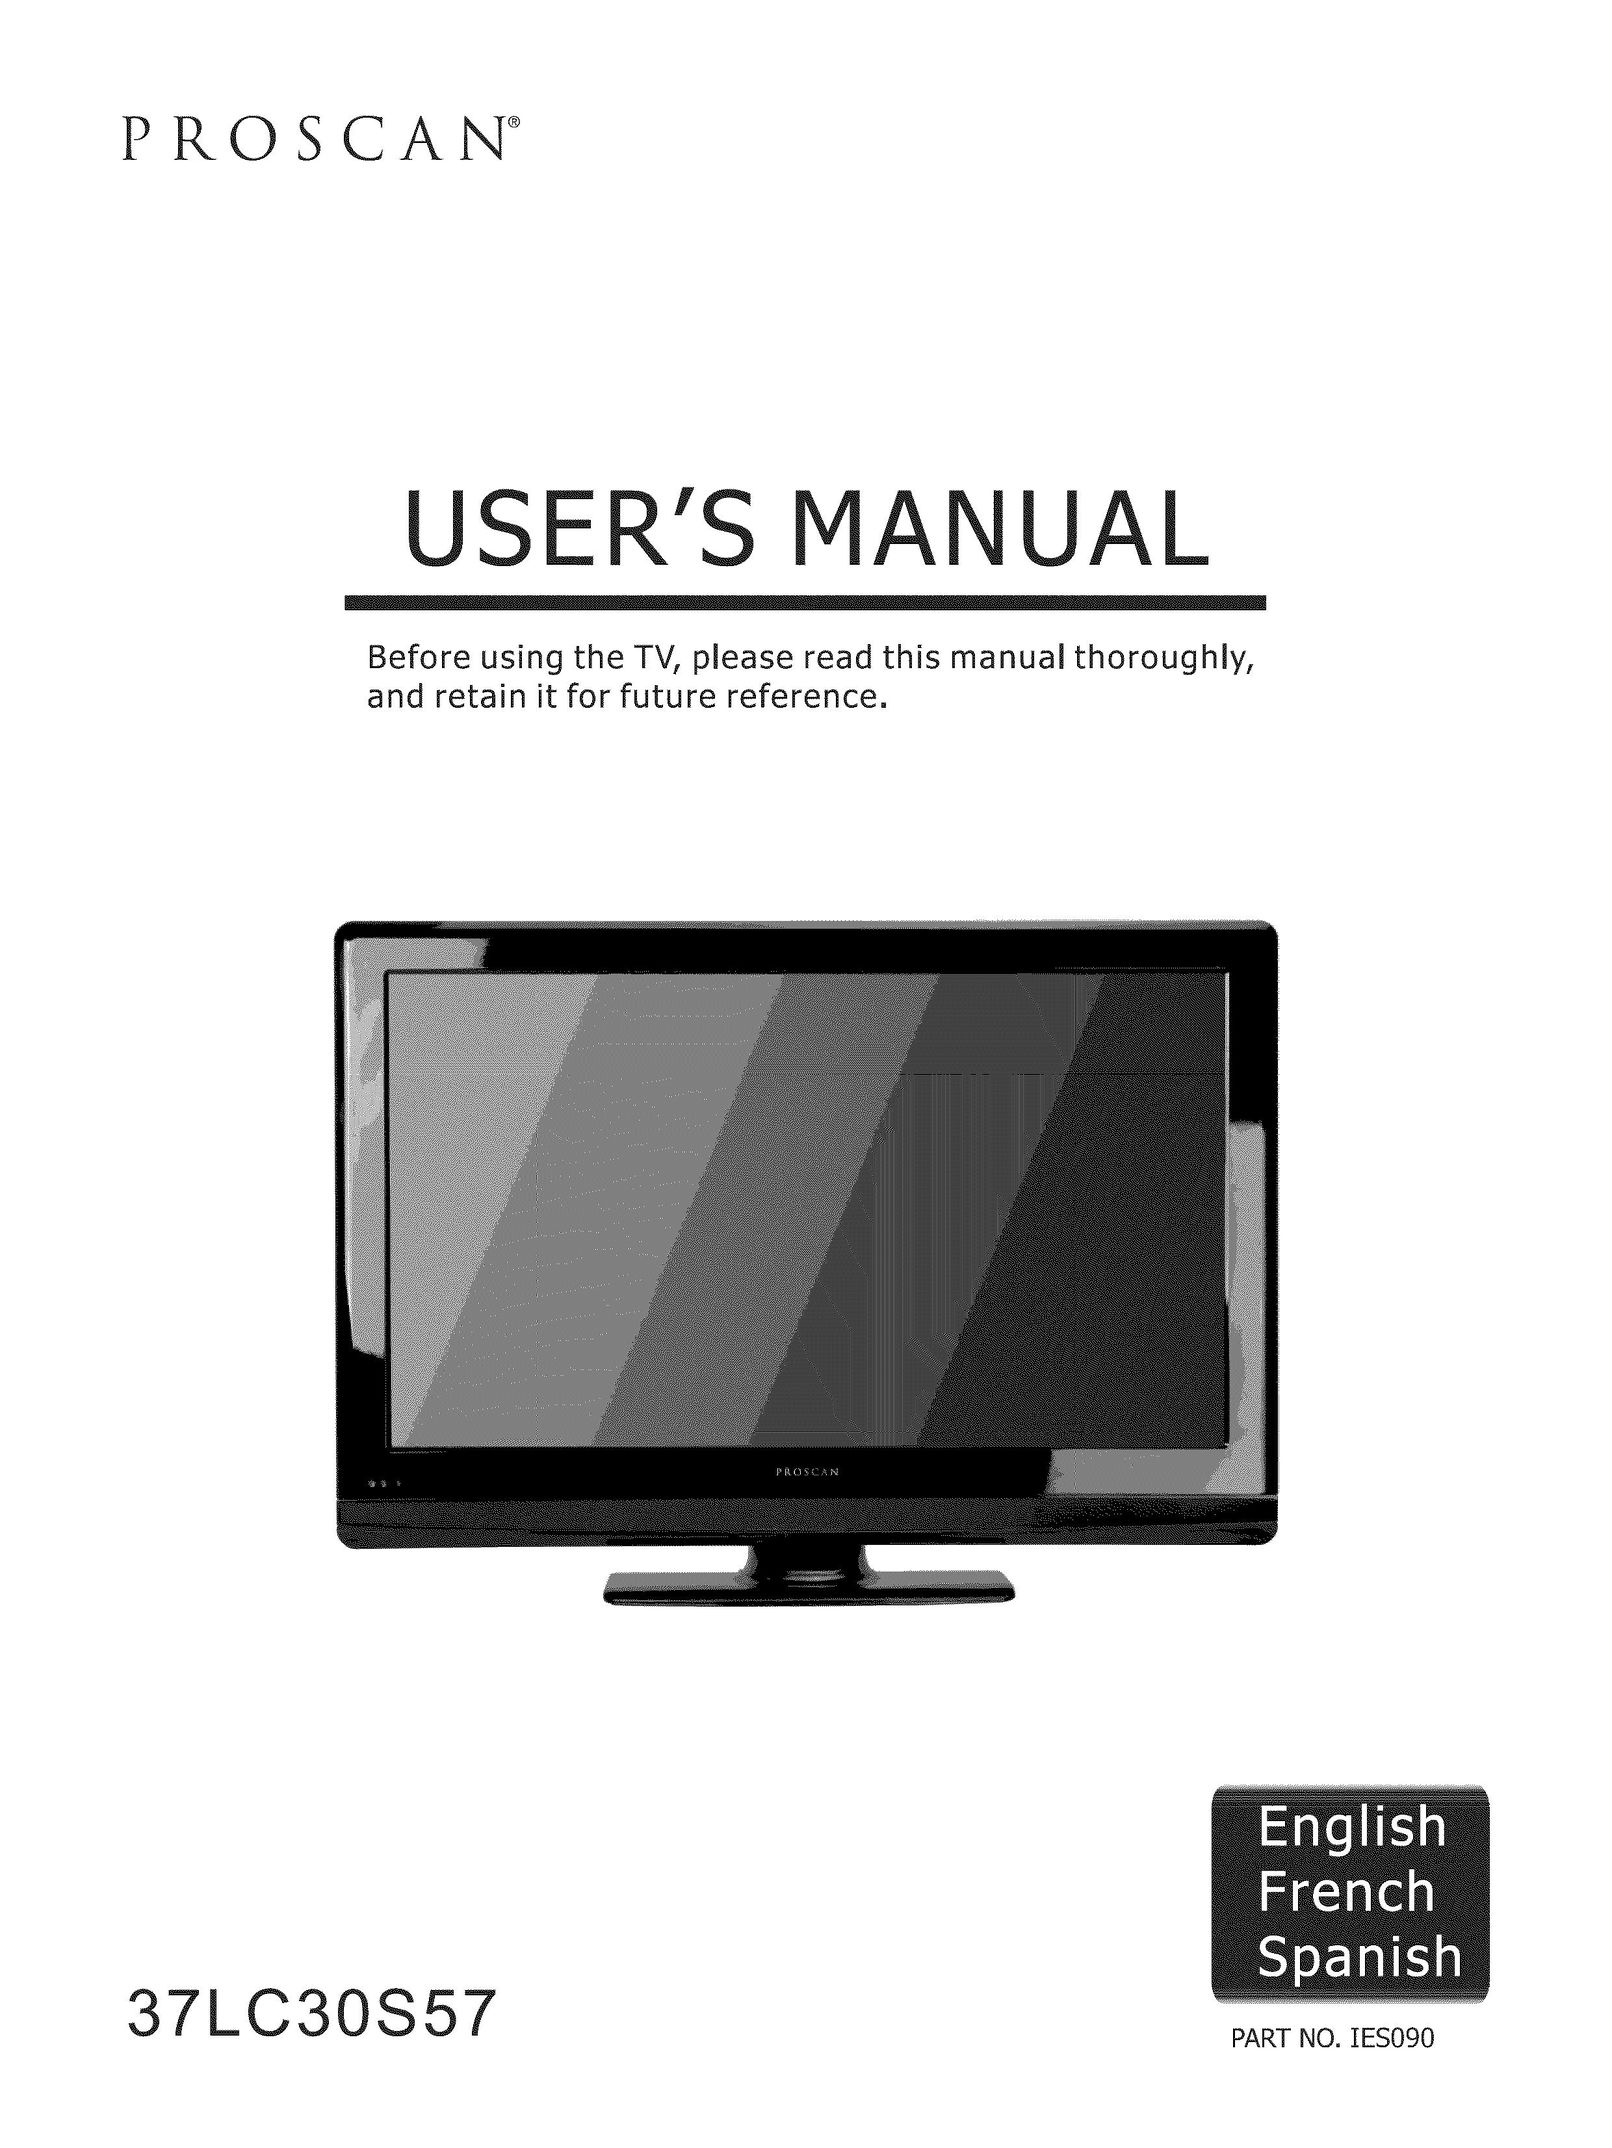 ProScan 37LC30S57 Flat Panel Television User Manual